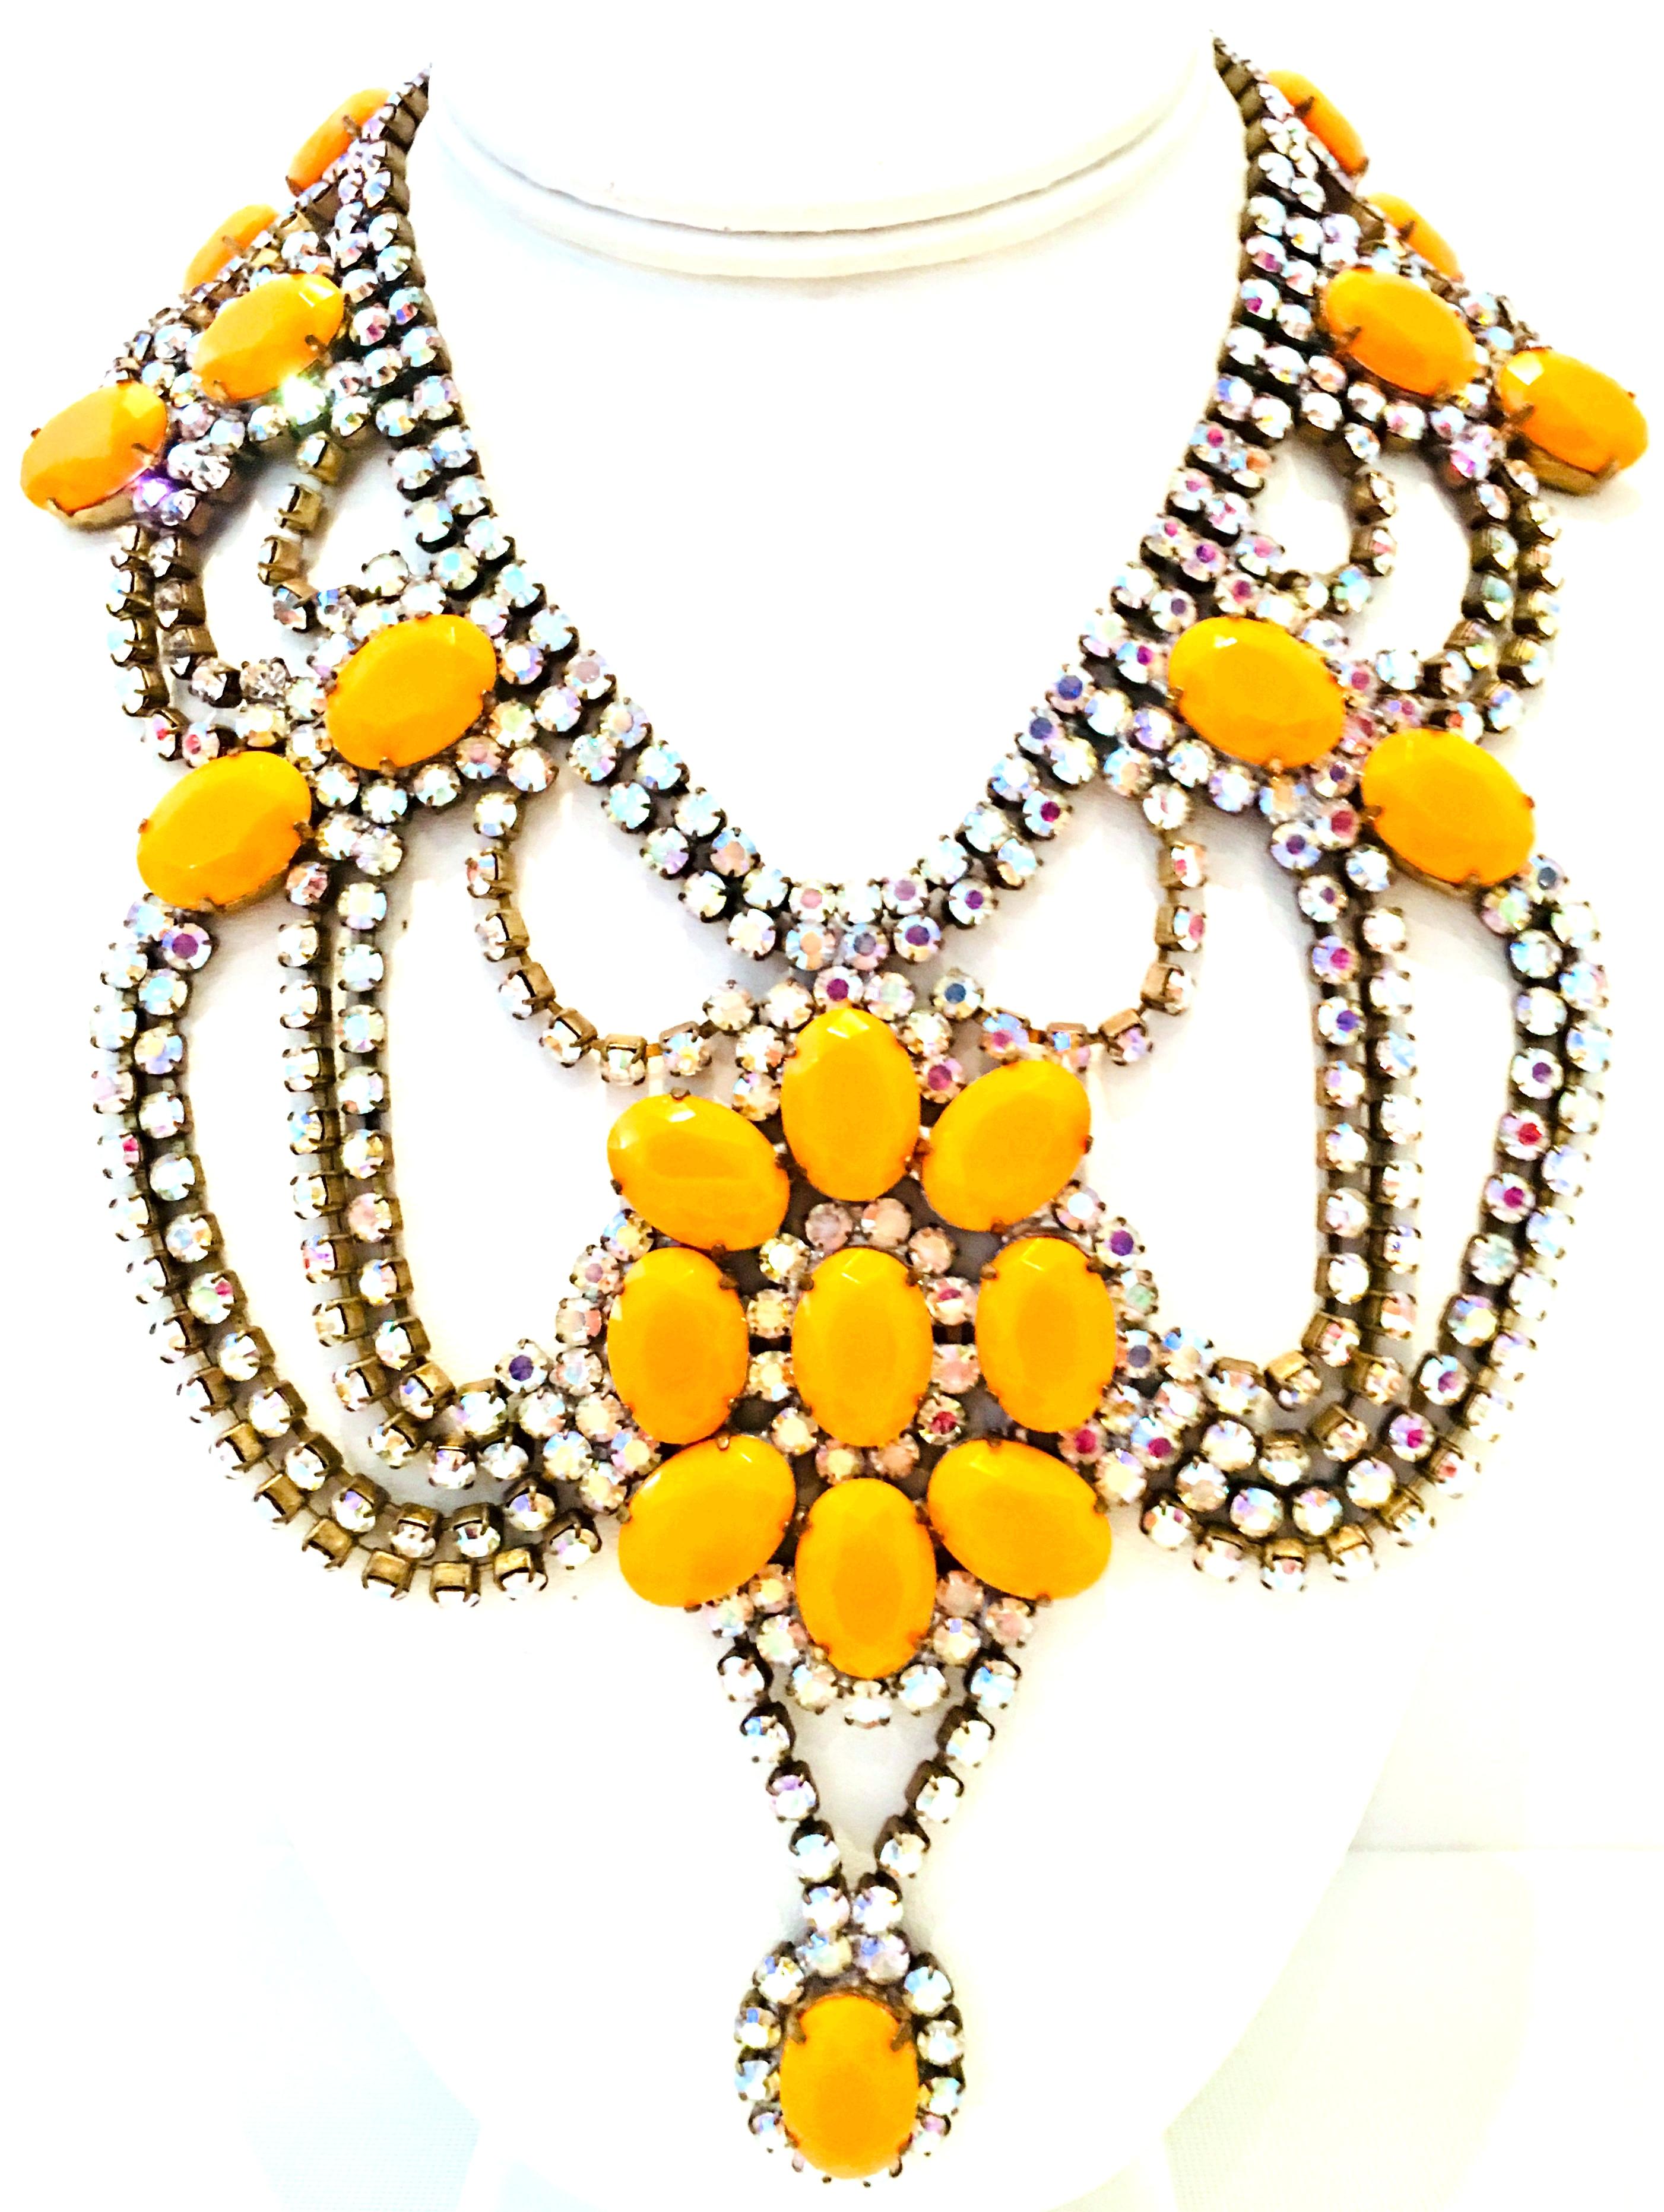 20th Century Bohemia Style Austrian Crystal & Lucite Stone Multi Tier Necklace & Pair Of Chandelier Earrings. This incredible three piece artisan set is finely hand crafted. Features a substantial. timeless, dramatic multi strand necklace with